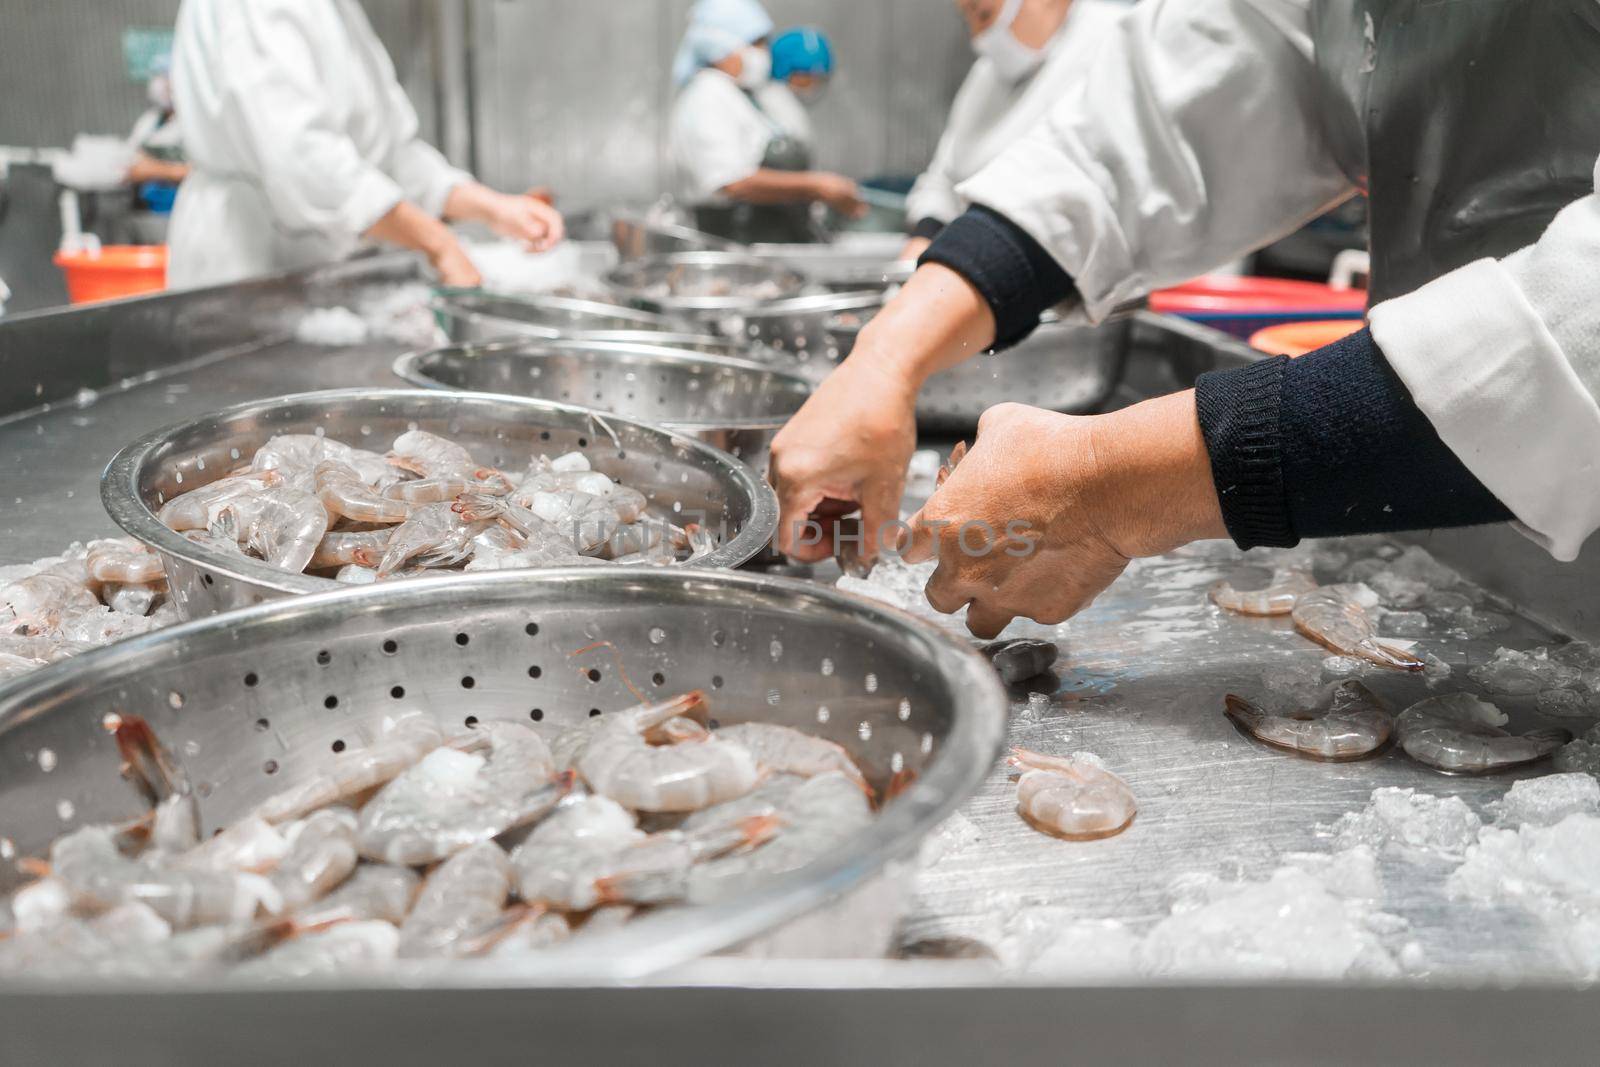 Latin American workers inspecting frozen farmed shrimp at an industrial food plant by cfalvarez